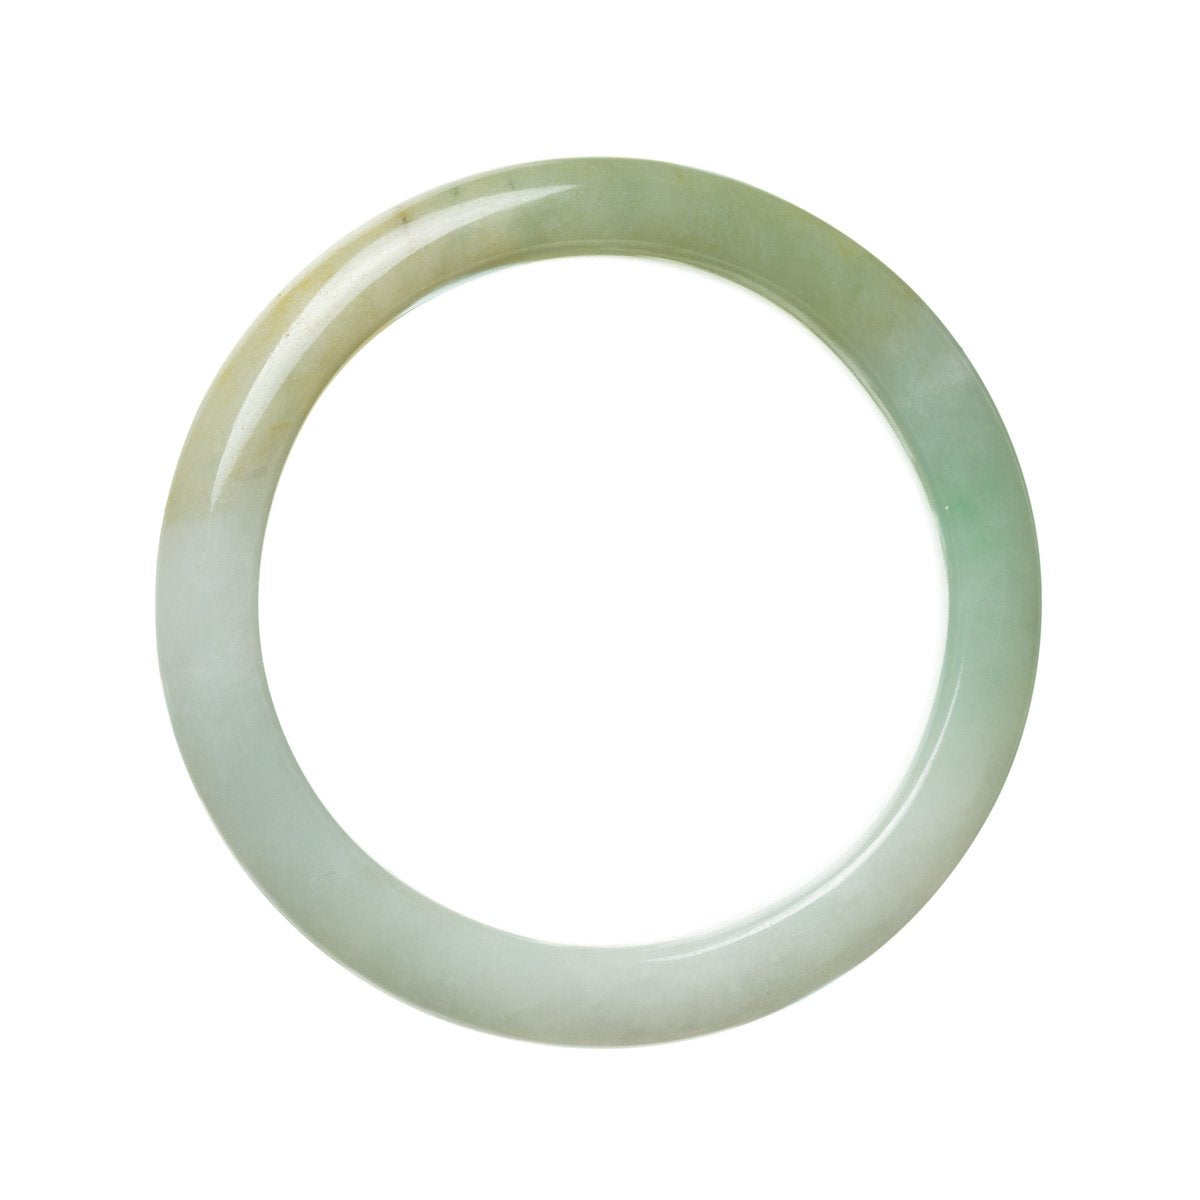 A round, genuine natural green Burmese jade bangle, measuring 63mm in diameter. The bangle is beautifully crafted and features a stunning shade of green. Perfect for adding a touch of elegance to any outfit.